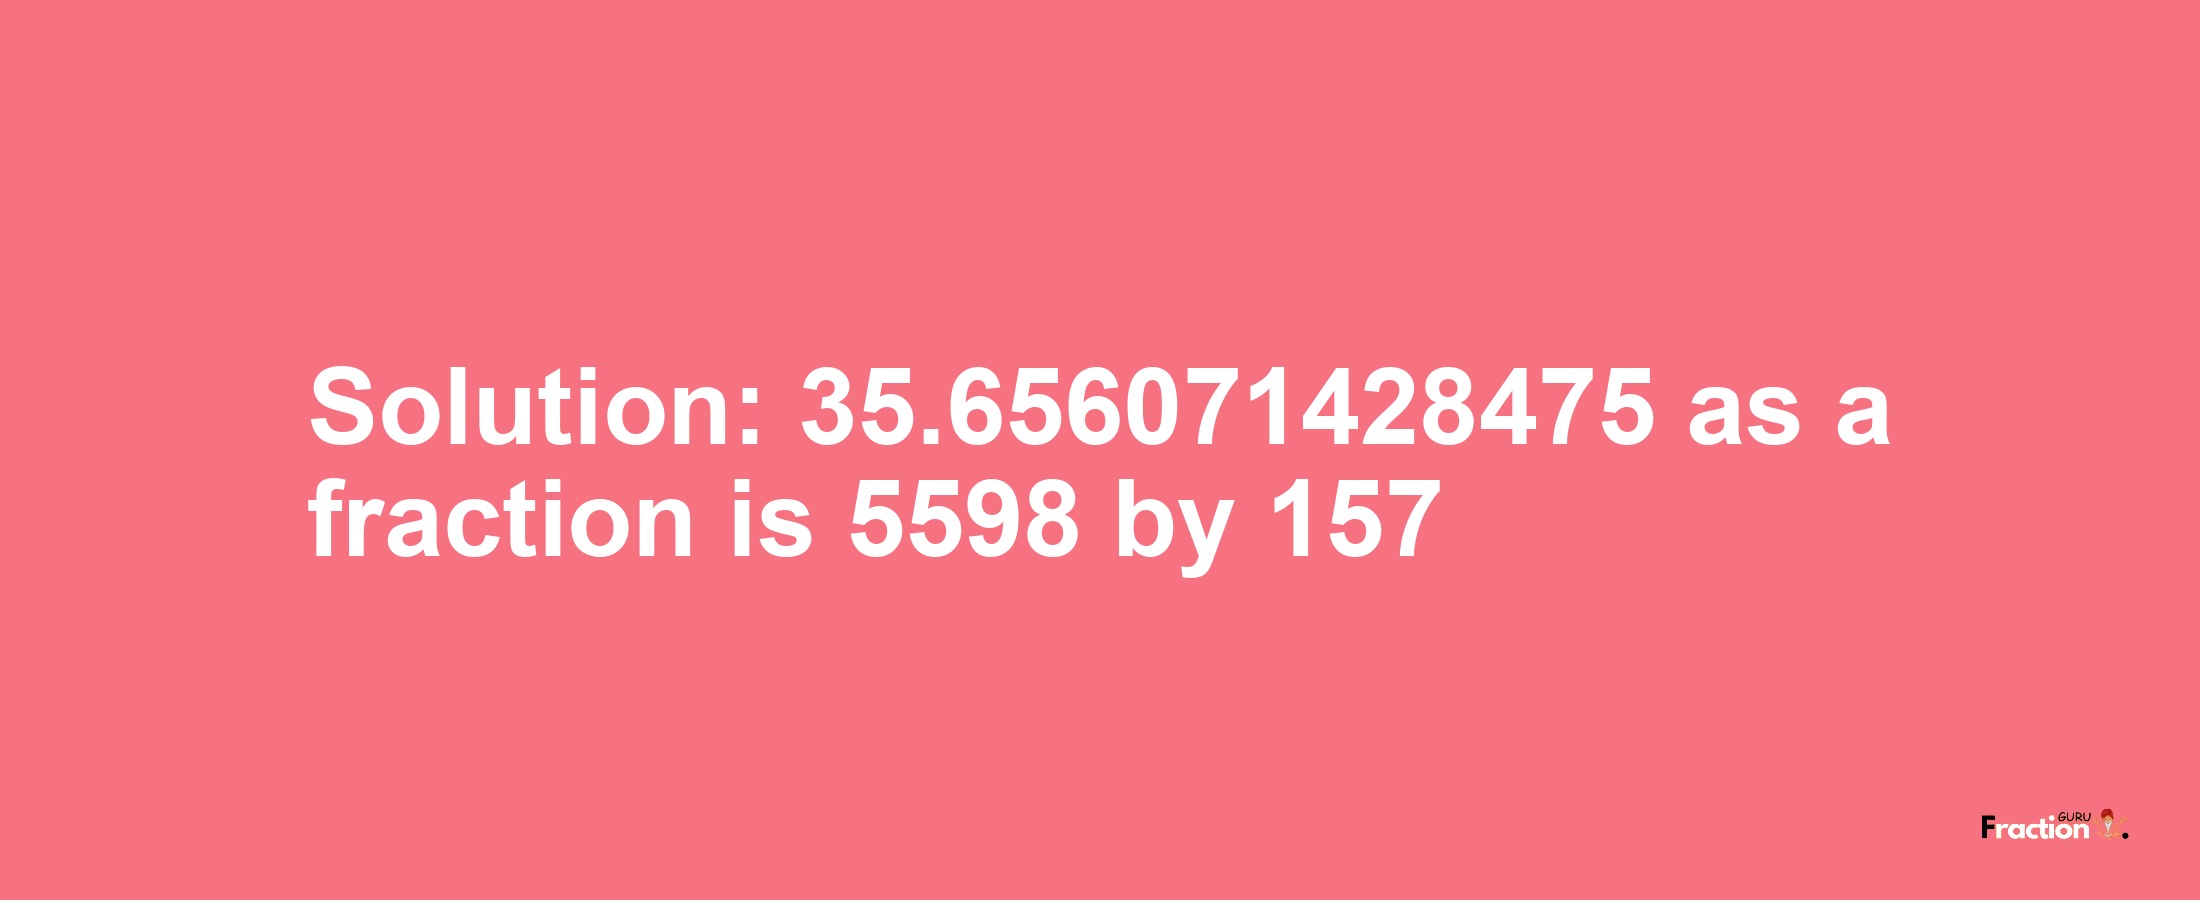 Solution:35.656071428475 as a fraction is 5598/157